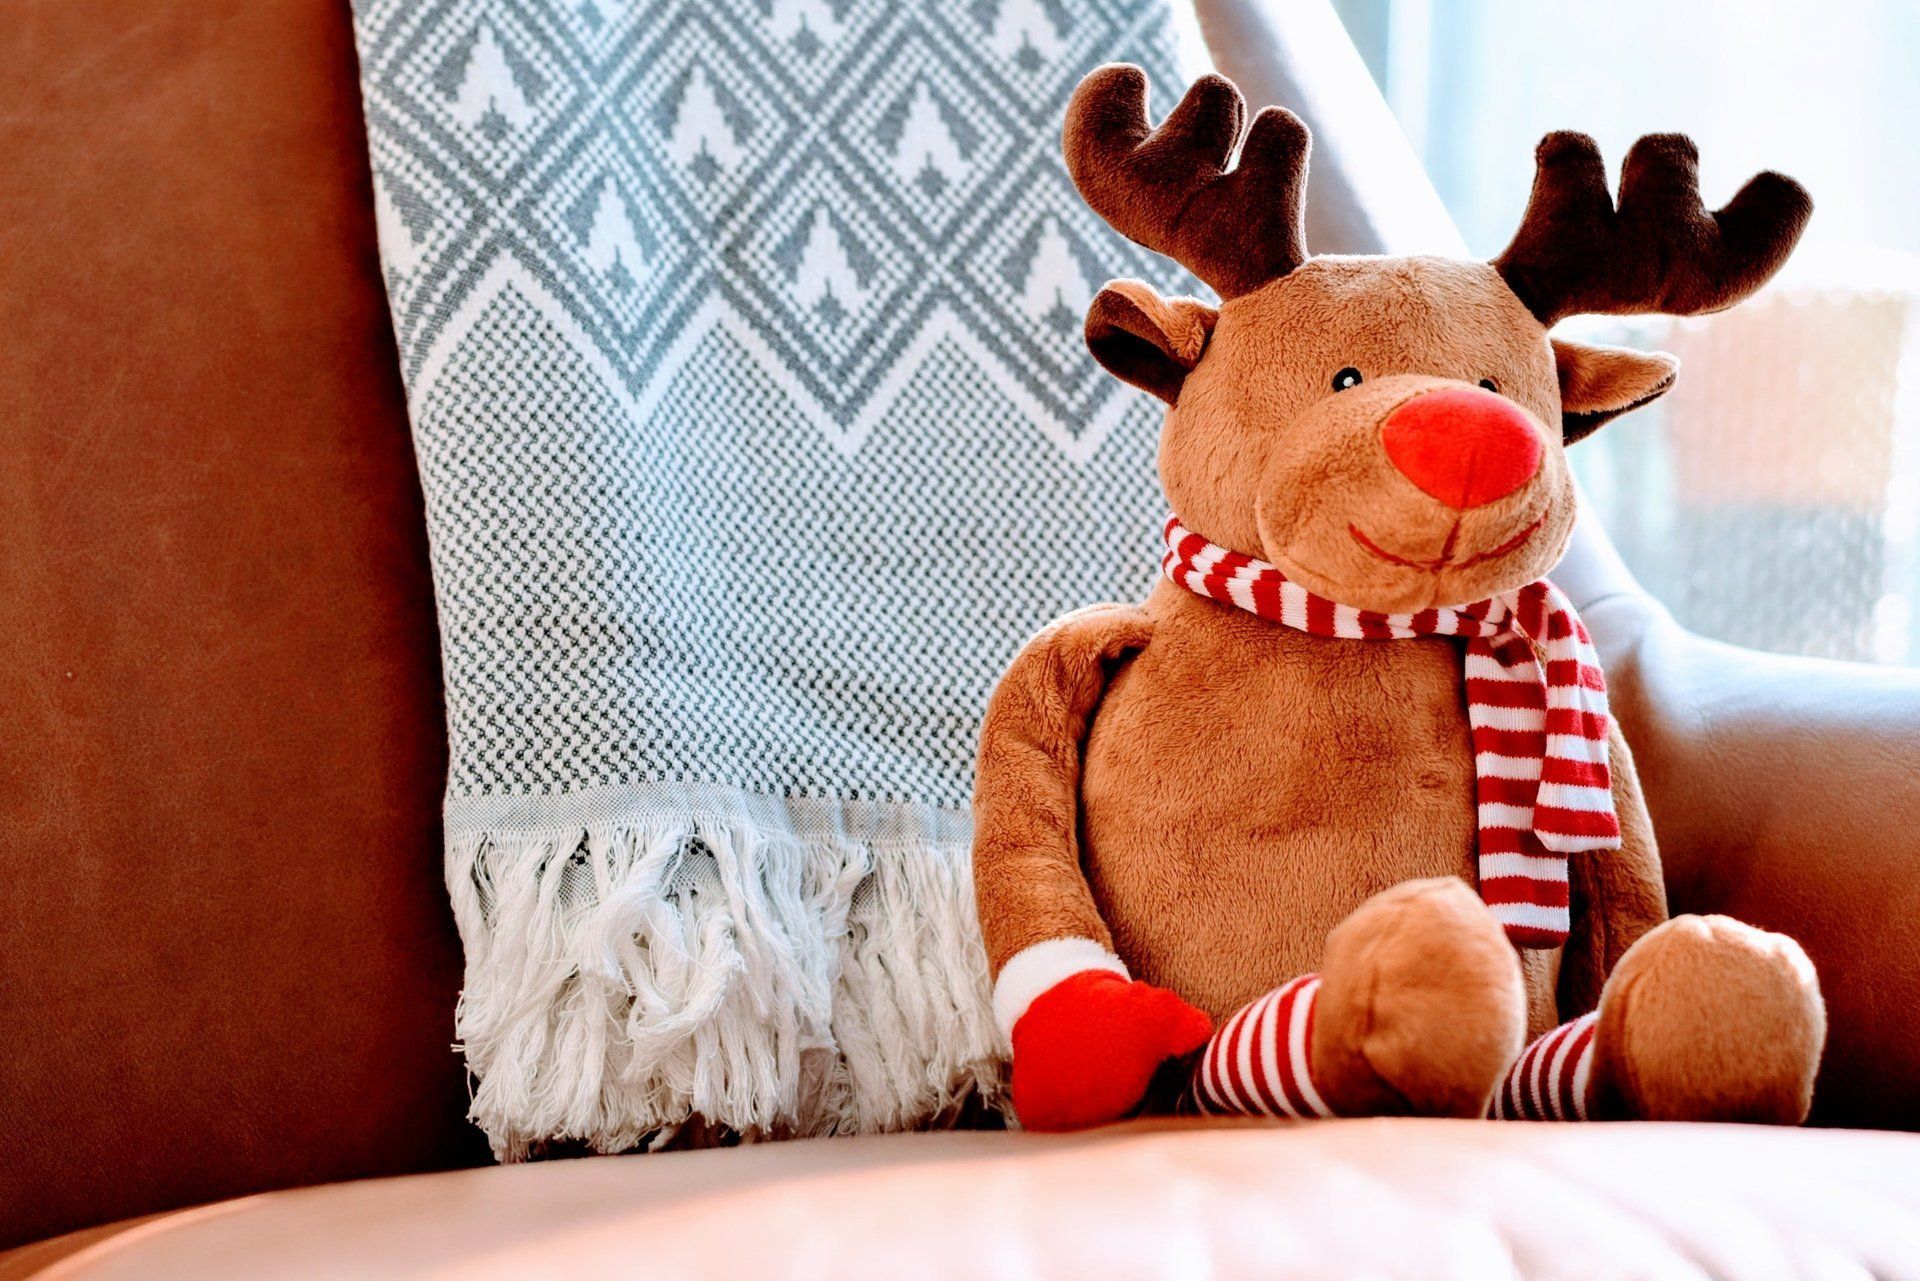 a stuffed reindeer is sitting on a couch next to a blanket